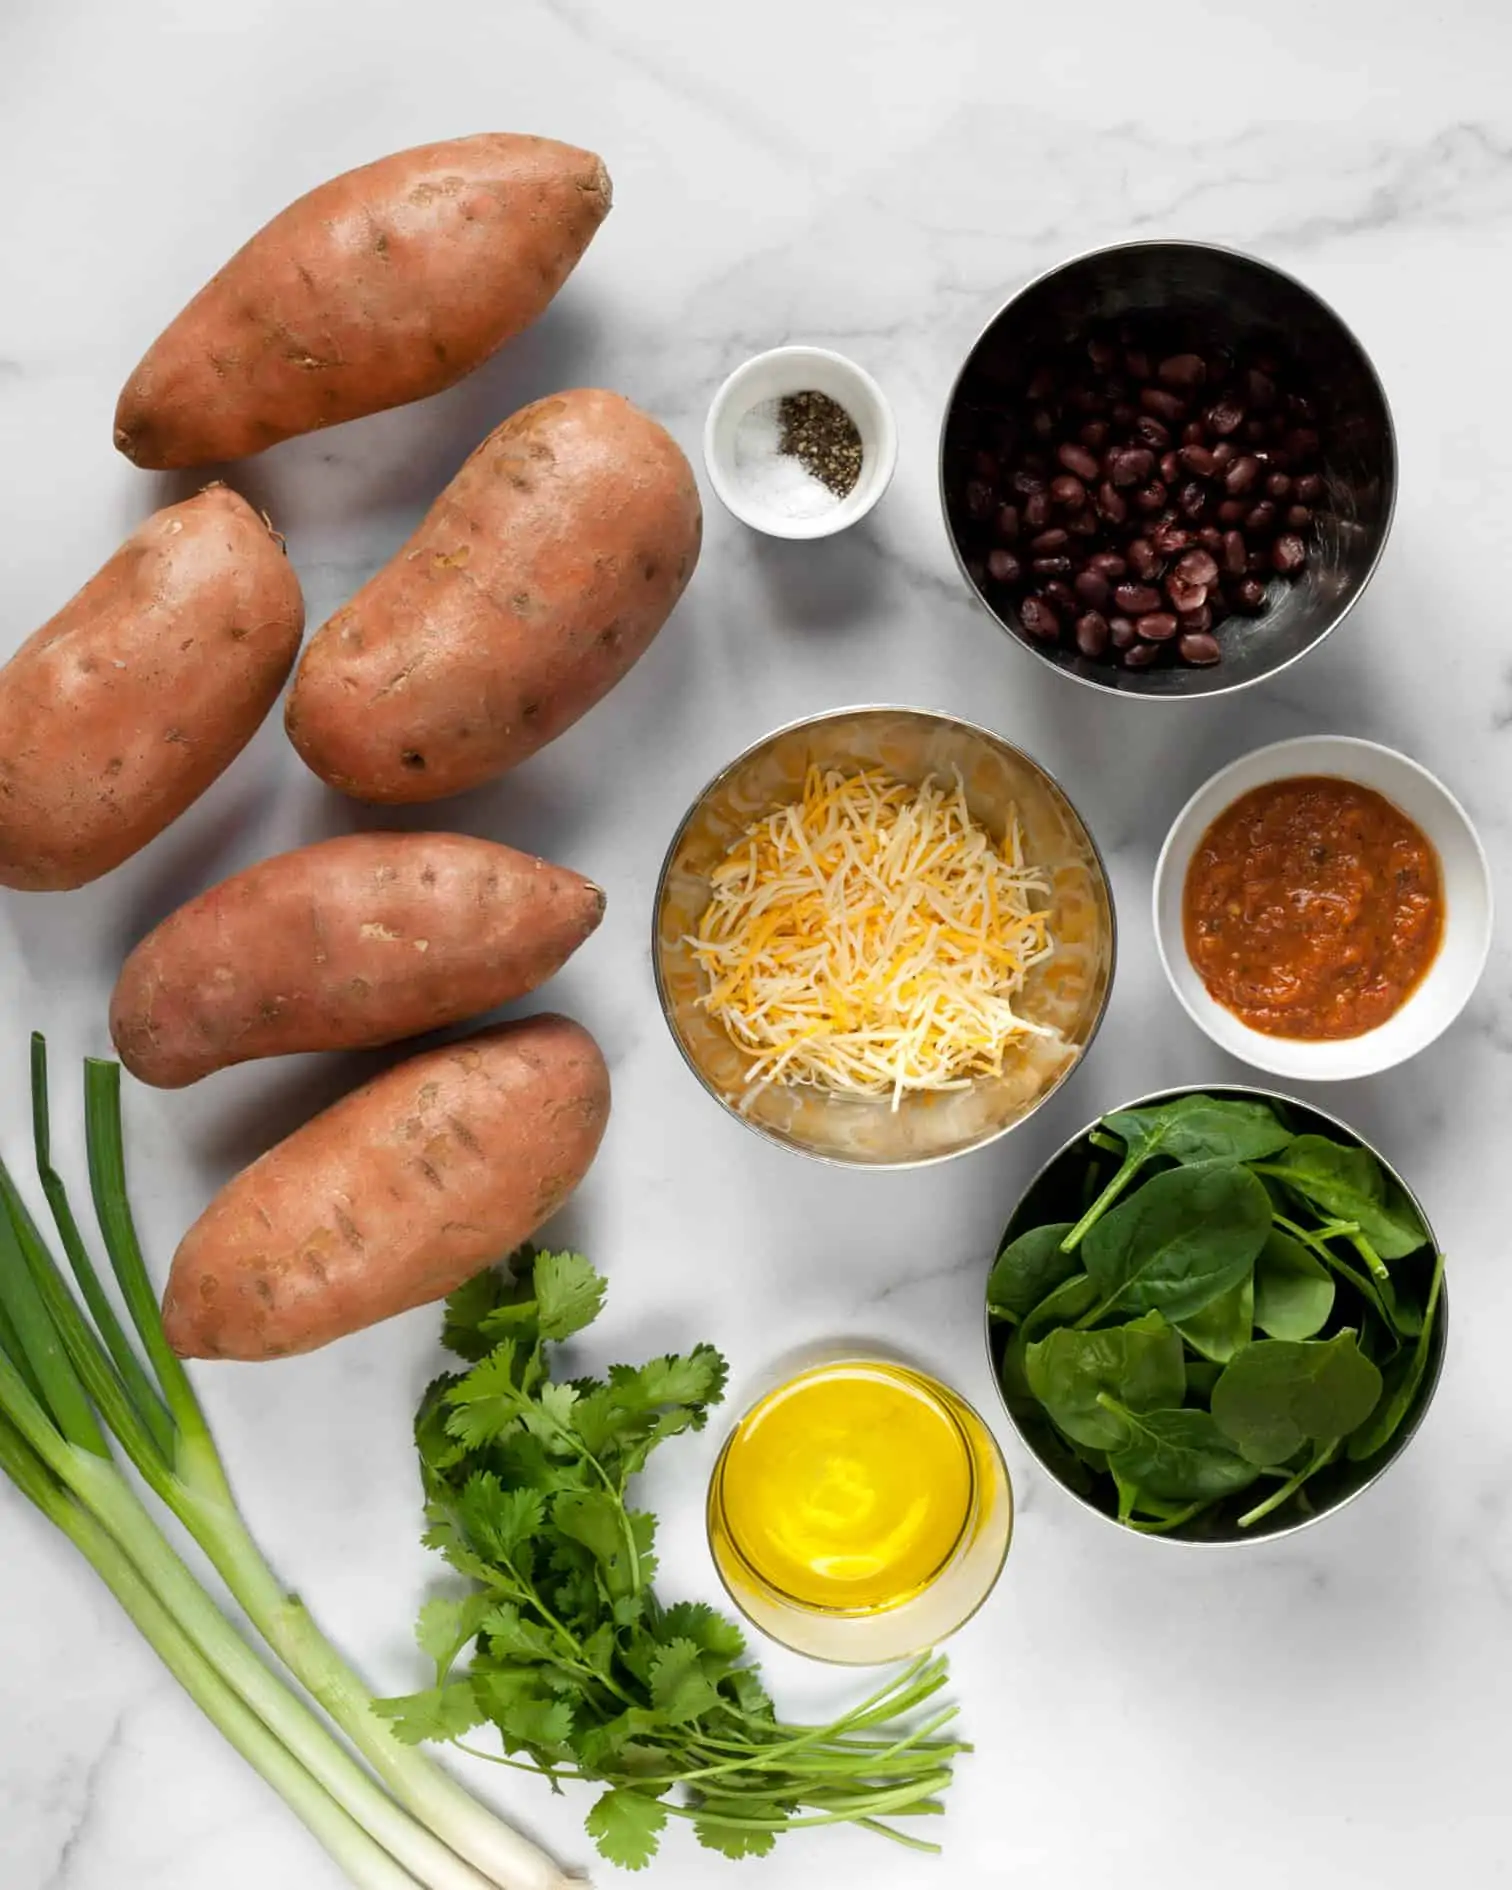 Ingredients including sweet potatoes, black beans, spinach, scallions, cilantro and cheese